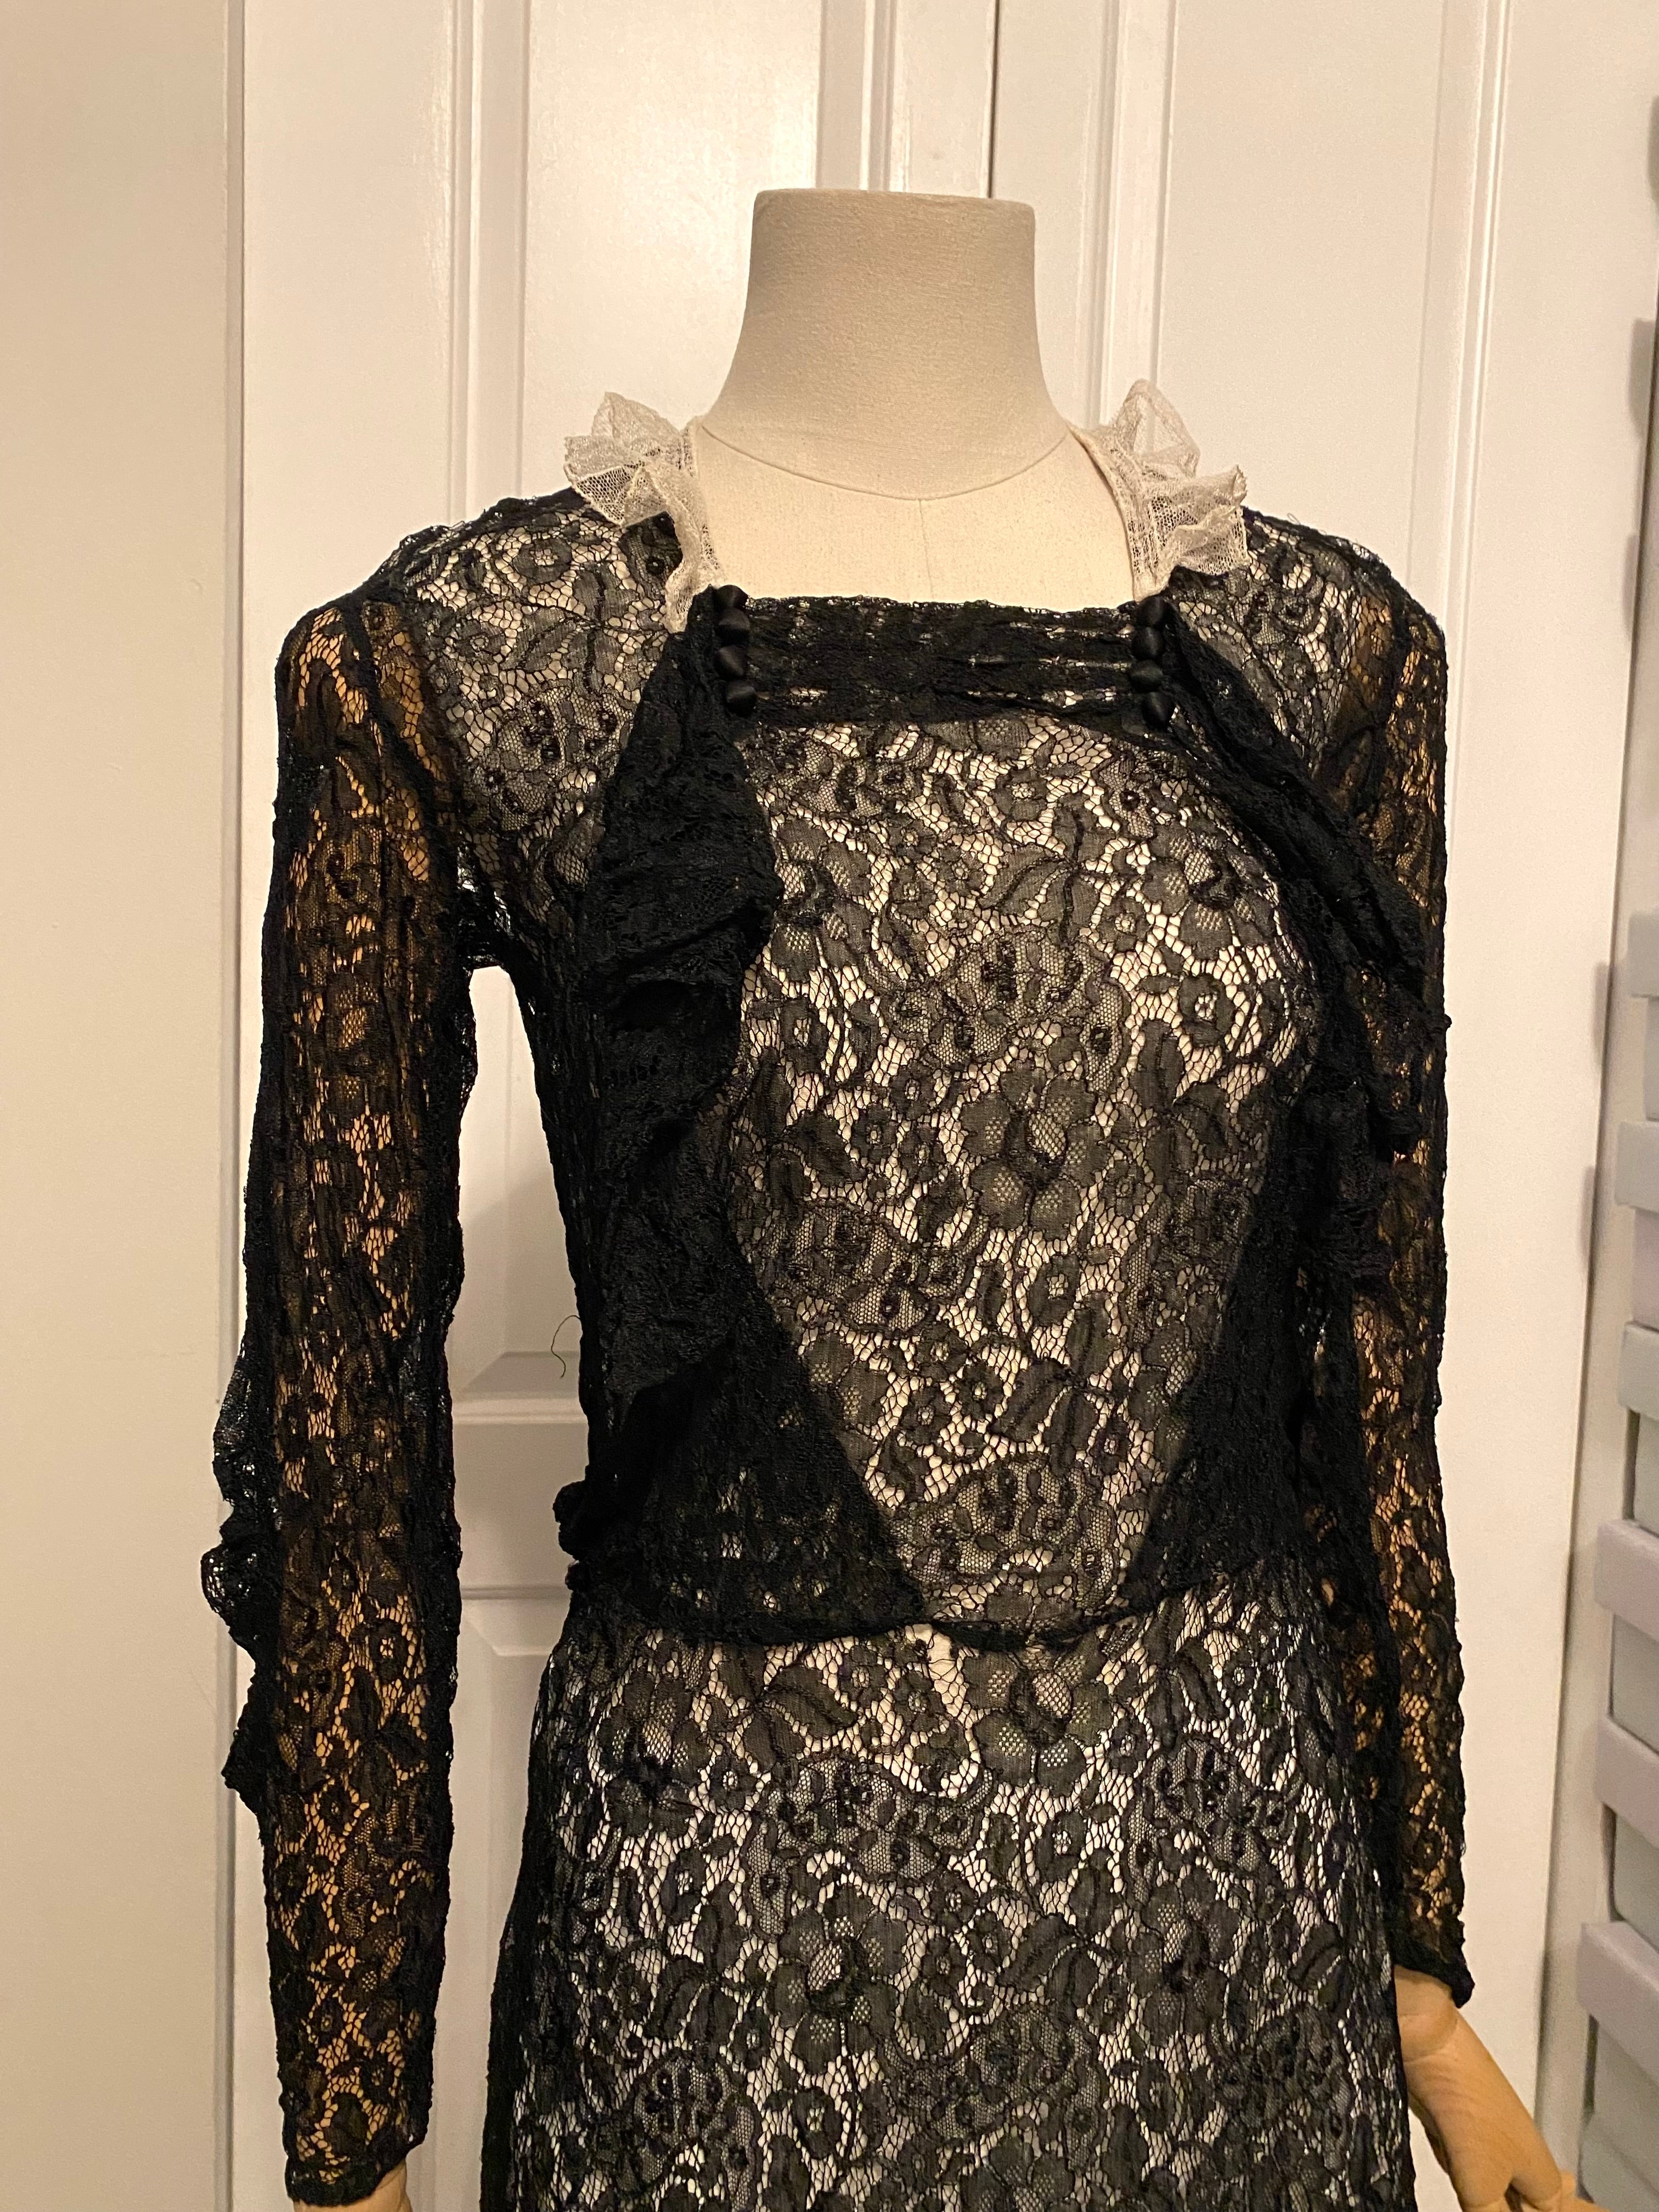 1930s Black Chantilly Lace Gown w/White Lace Collar